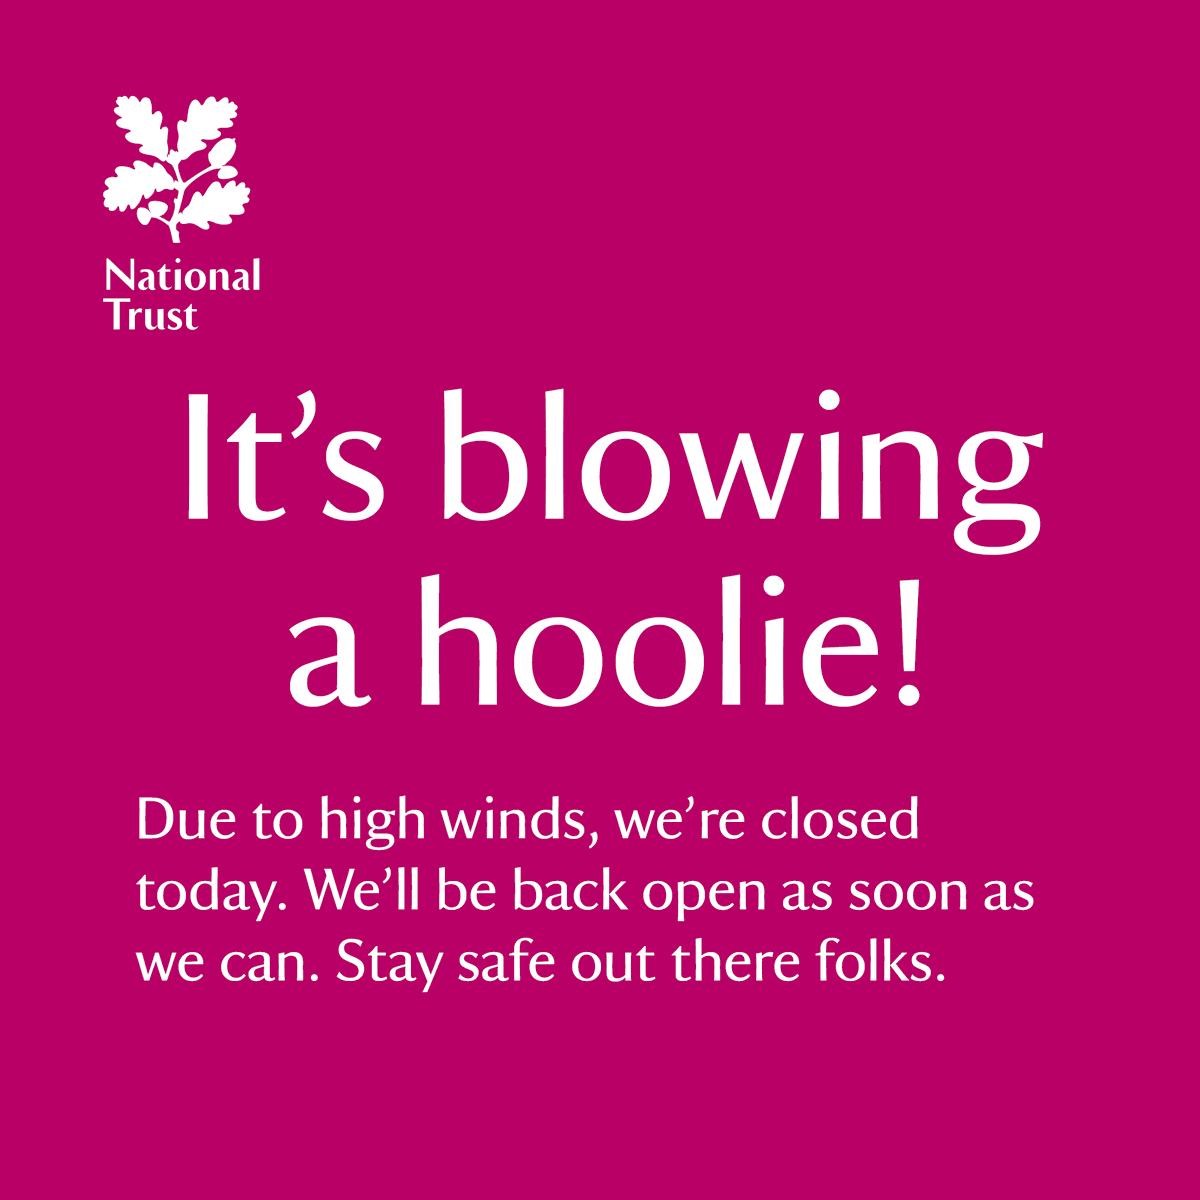 Hidcote is closed today, Wednesday 20 February, due to high winds. We expect to open as normal at 11am on Thursday. Please see the website for up-to-date information nationaltrust.org.uk/hidcote